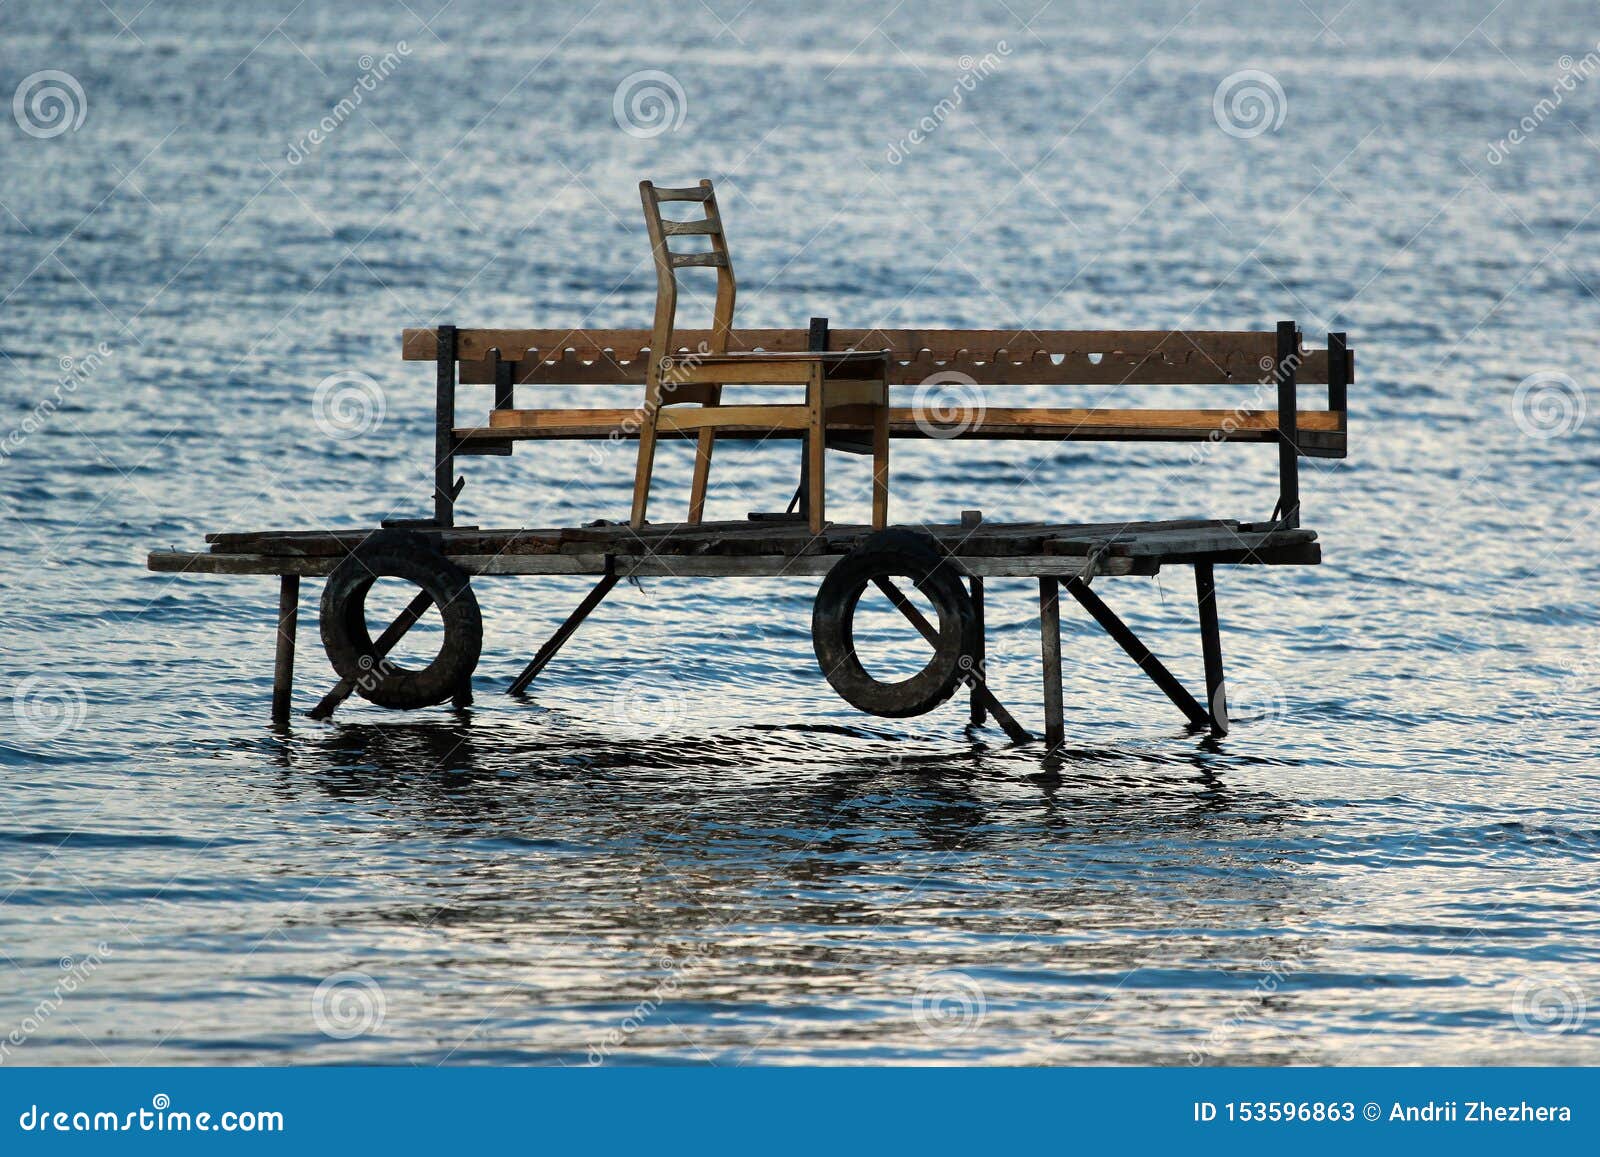 Wooden Fishing Platform in Water, with Tire Fenders and Chair Stock Image -  Image of relaxation, river: 153596863